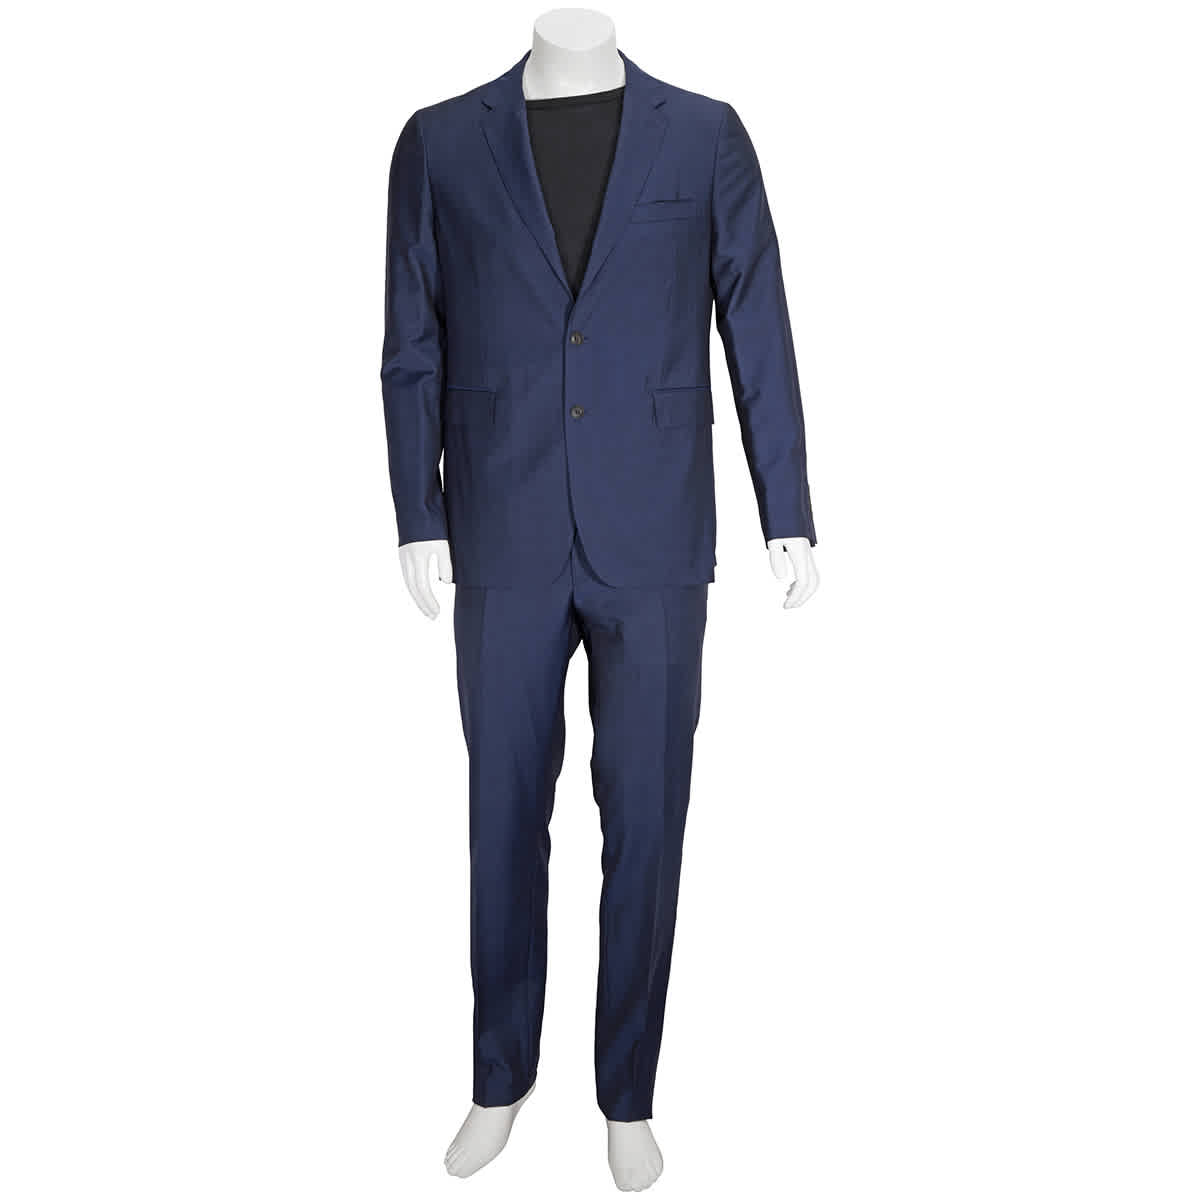 BURBERRY SOHO FIT WOOL MOHAIR SUIT, BRAND SIZE 48R